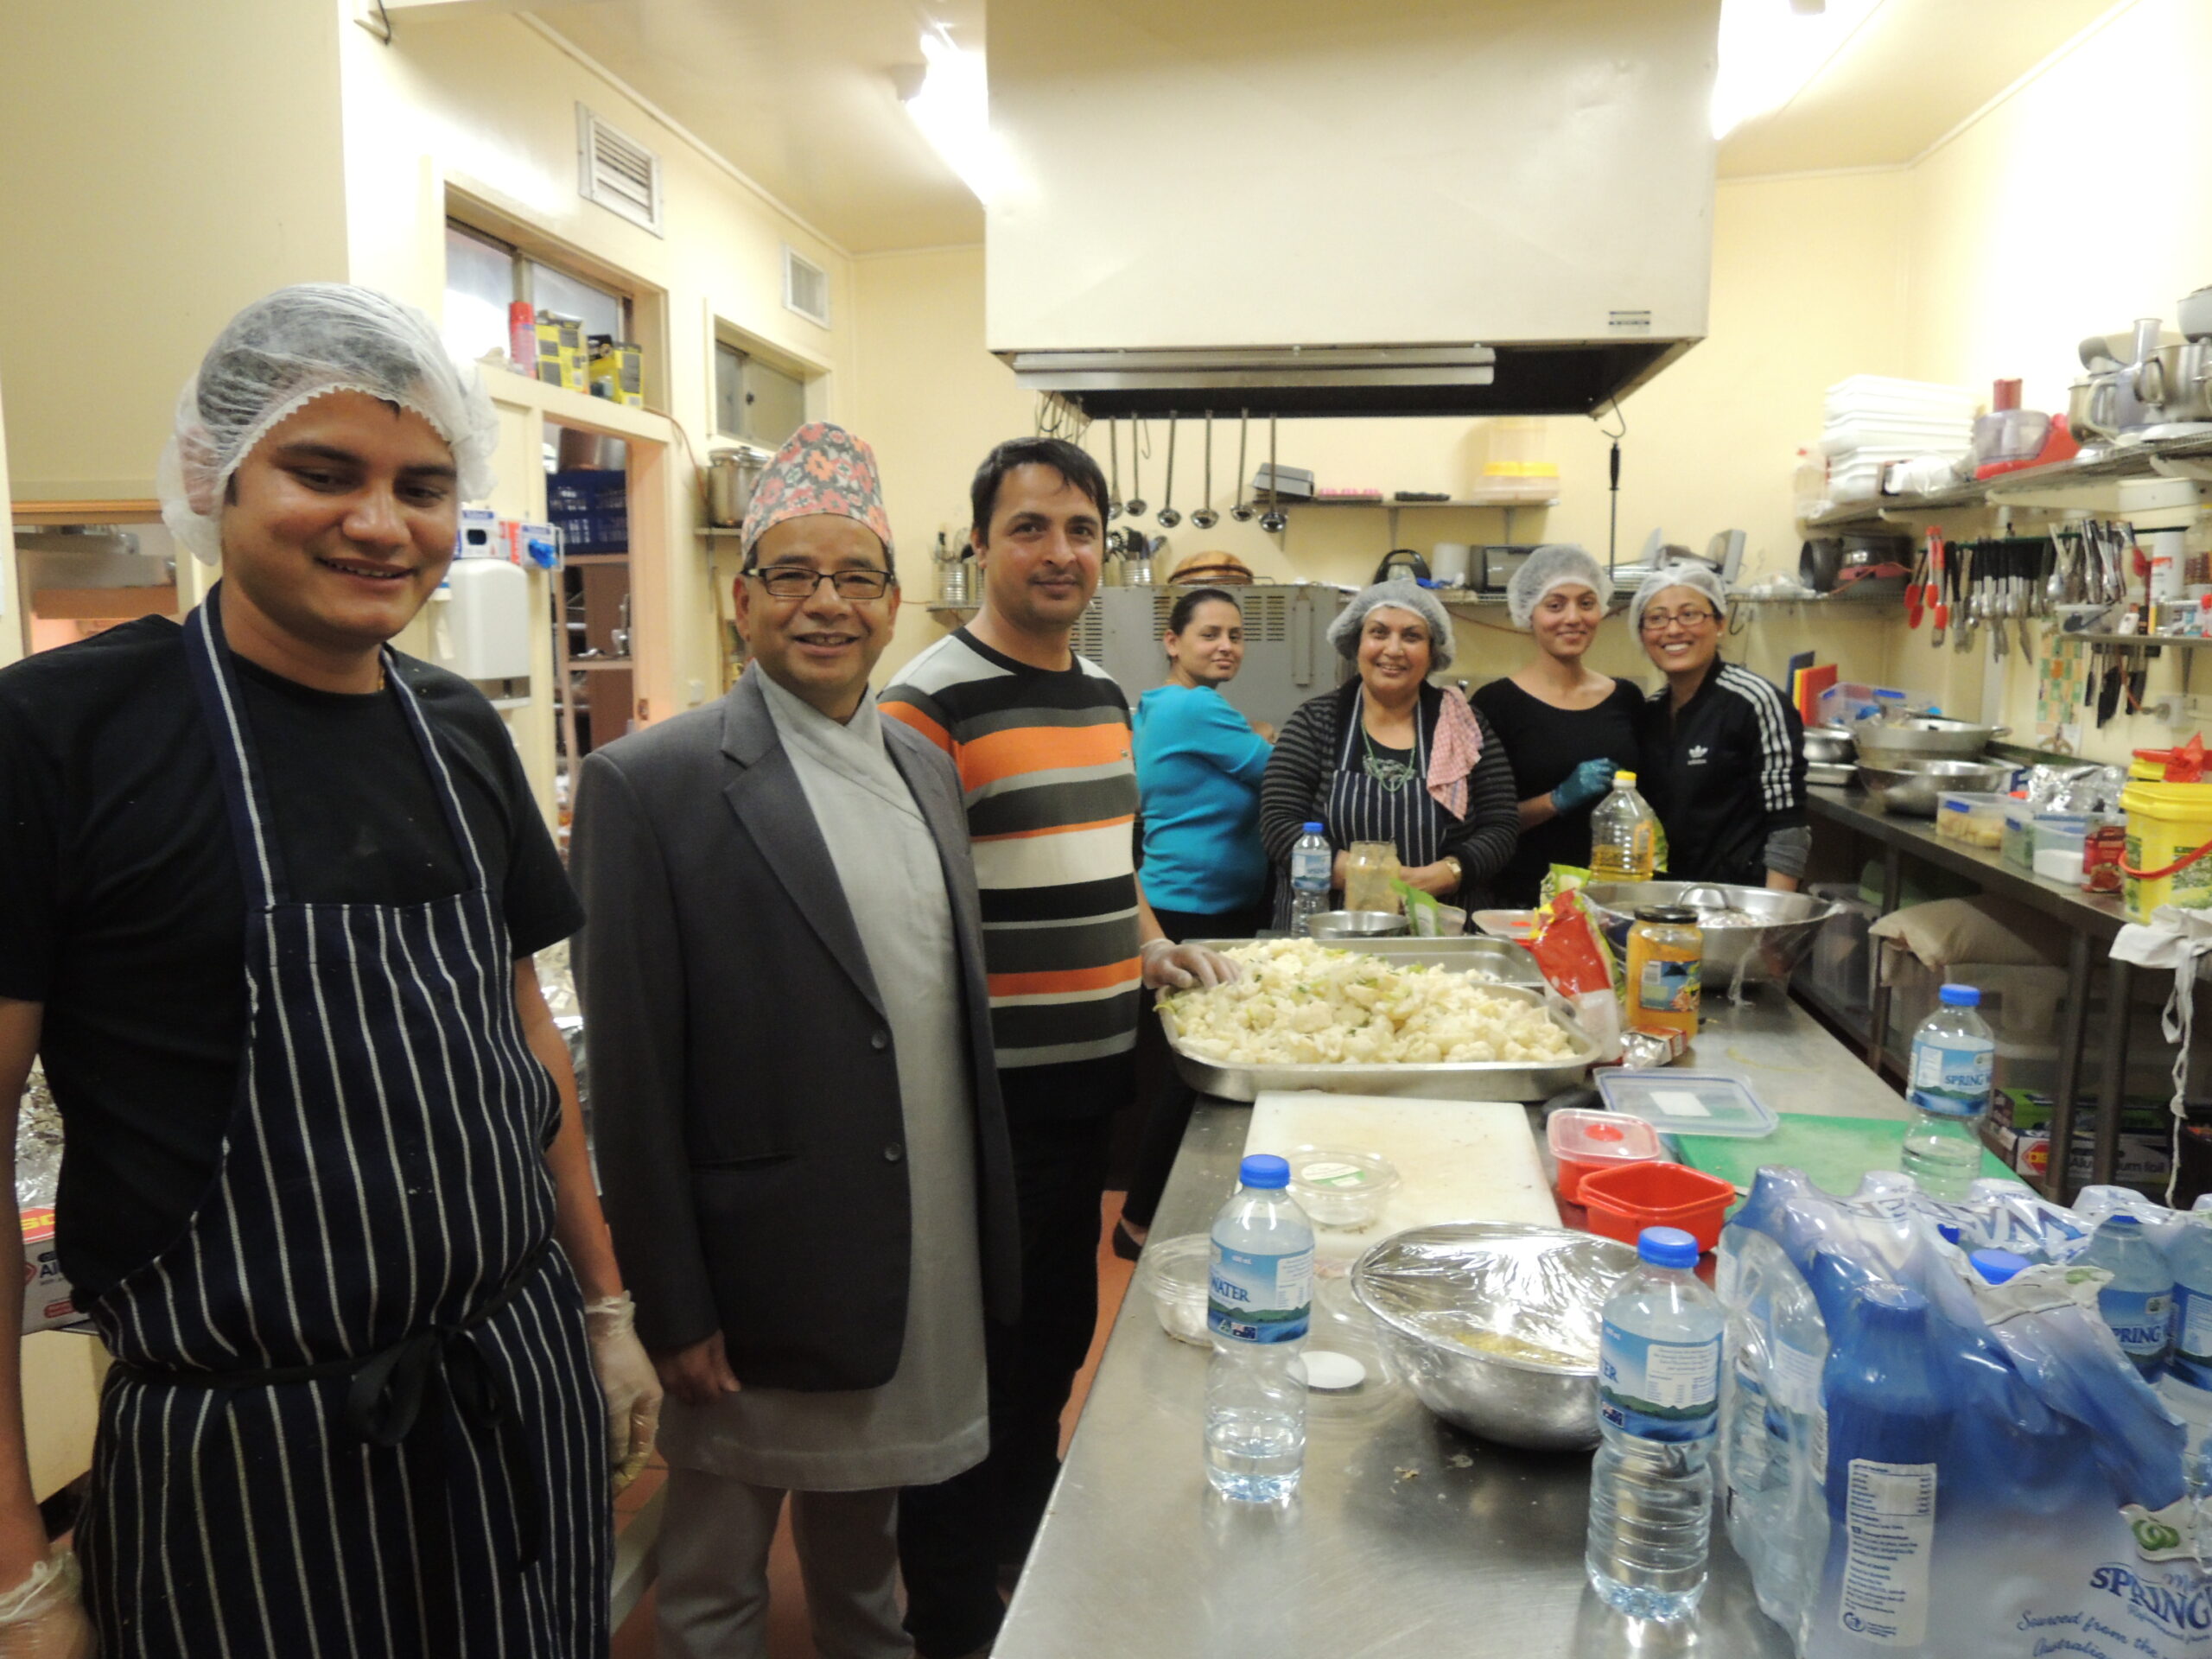 Kedar with a group of Nepalese volunteers preparing food to raise funds for earthquake relief in Nepal.